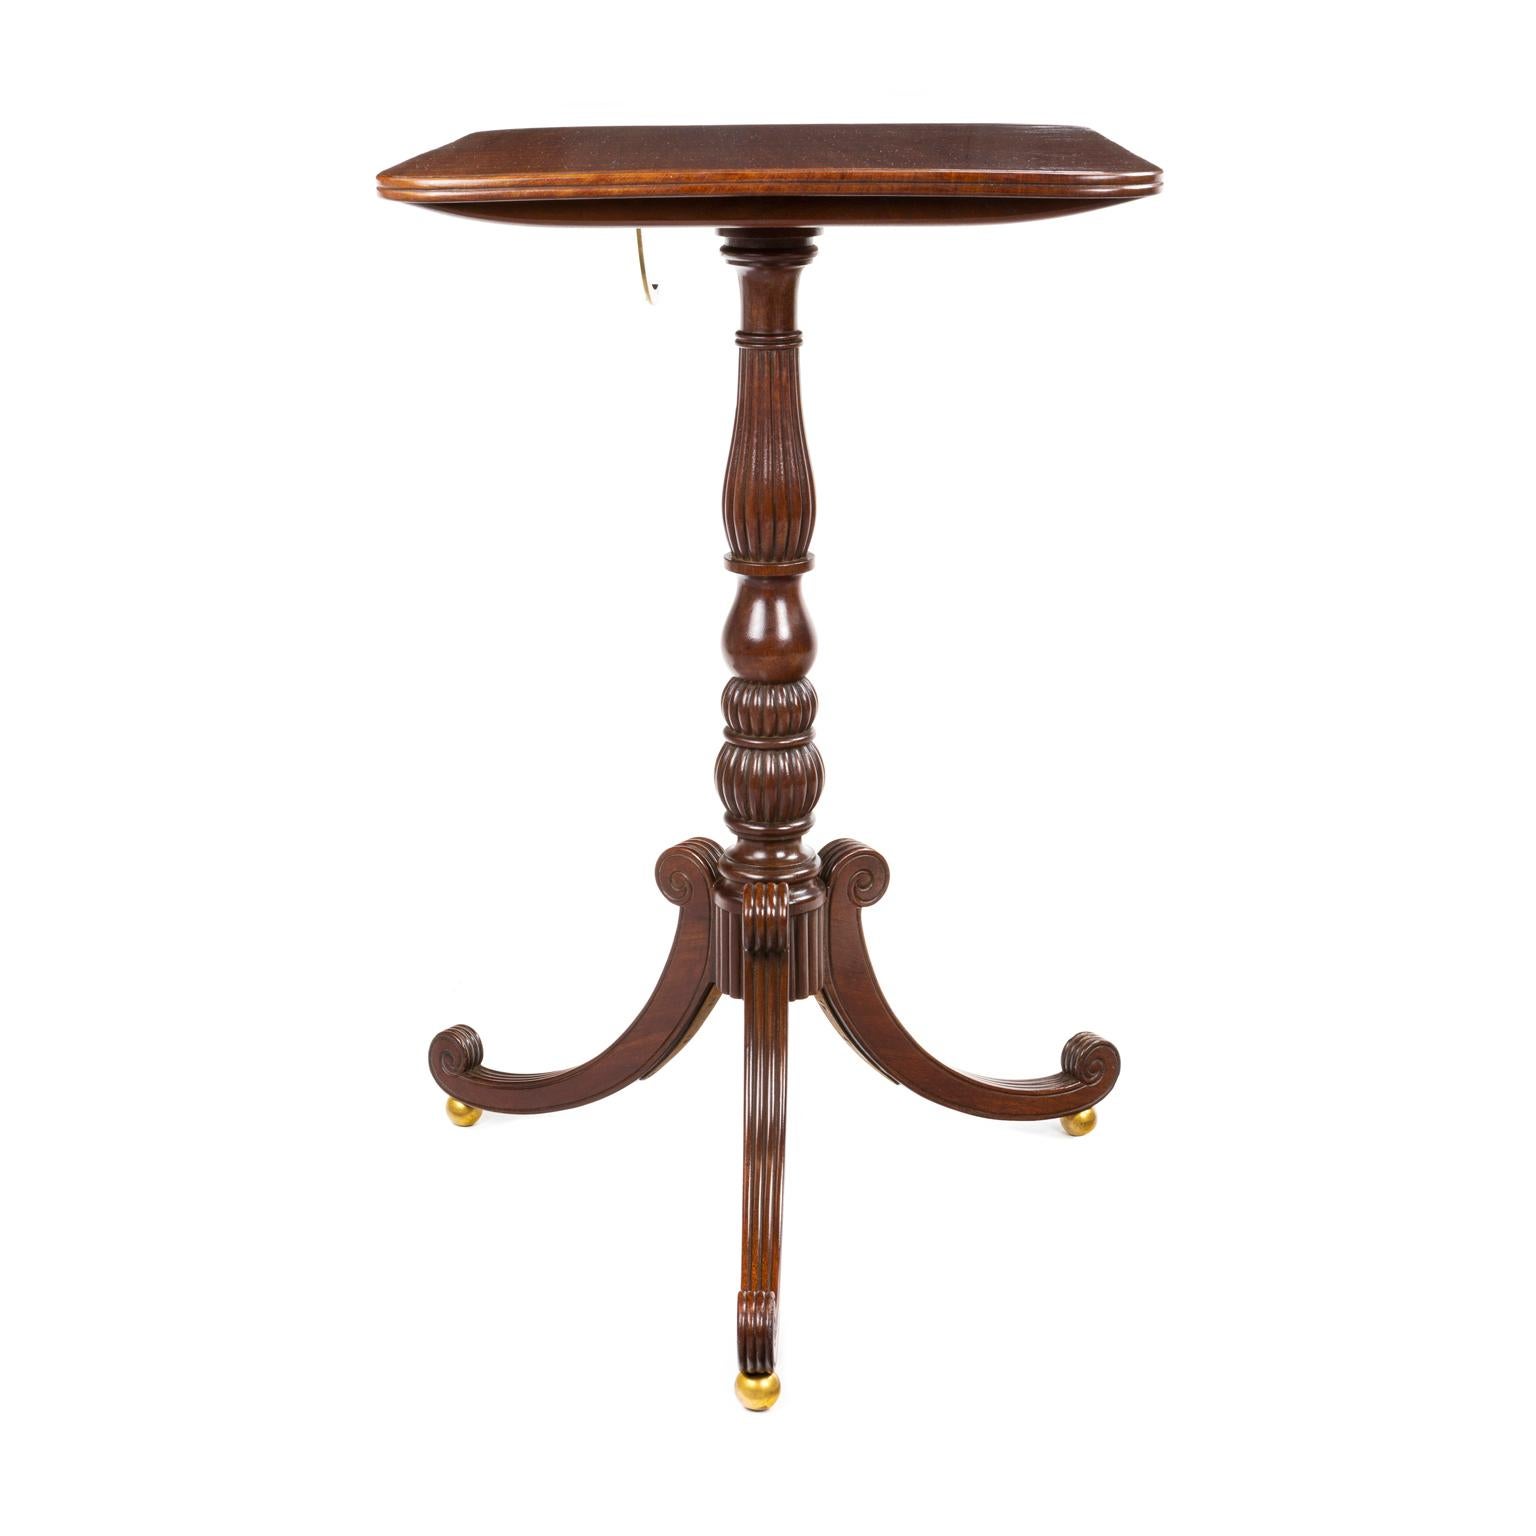 A fine quality Regency plumb pudding mahogany pedestal table attributed to Gillows of Lancaster and London.

Gillows of Lancaster and London, also known as Gillow & Co., was an English furniture making firm based in Lancaster, Lancashire, and in